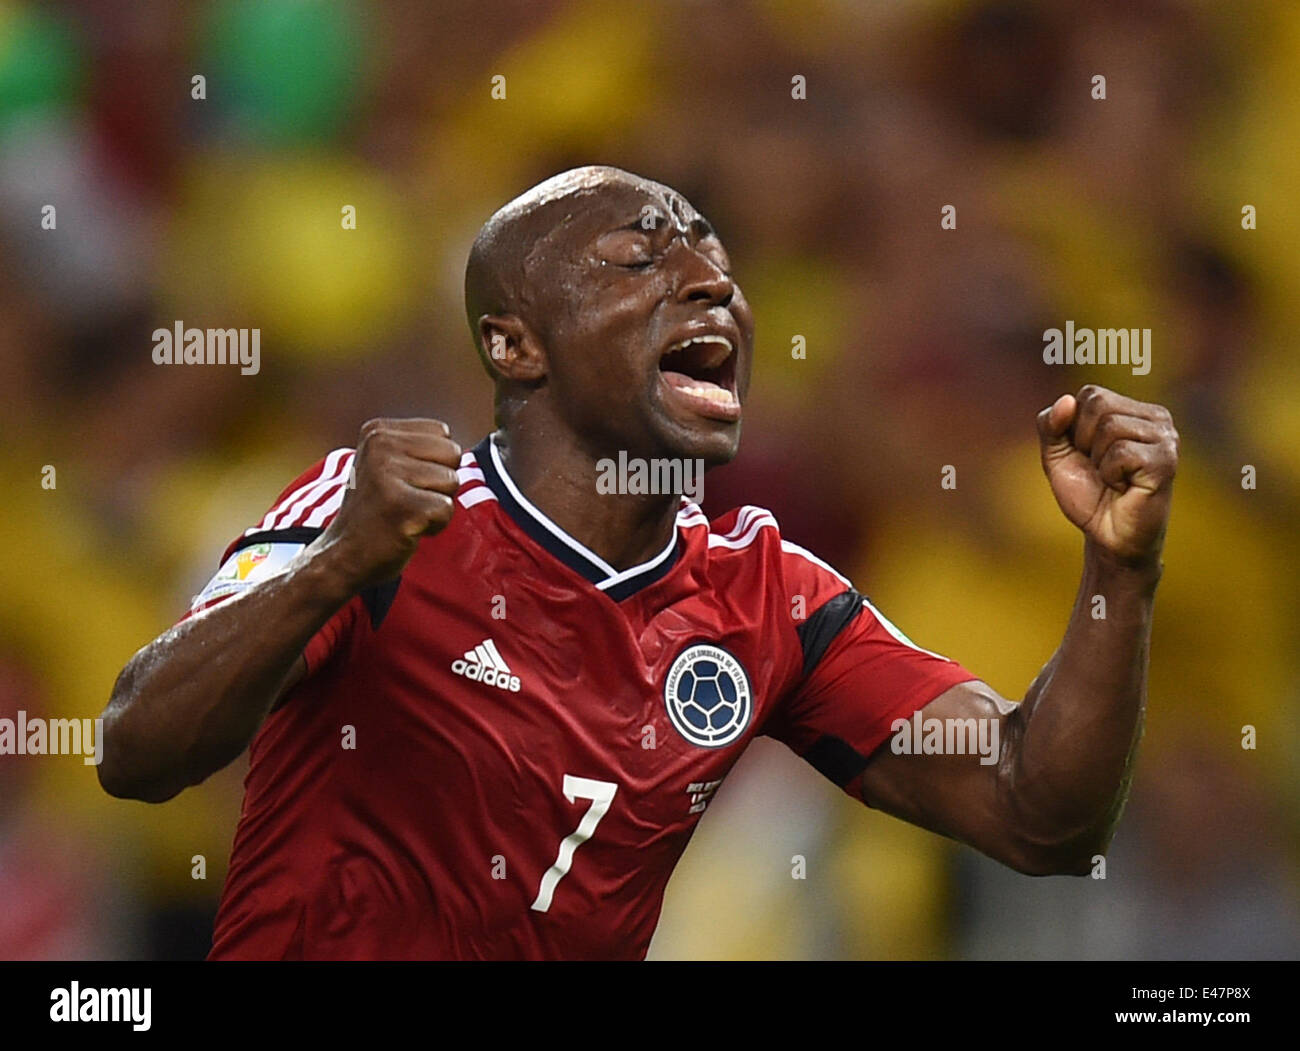 Fortaleza, Brazil. 04th July, 2014. Pablo Armero of Colombia reacts during the FIFA World Cup 2014 quarter final match soccer between Brazil and Colombia at the Estadio Castelao in Fortaleza, Brazil, 04 July 2014. Photo: Marius Becker/dpa/Alamy Live News Stock Photo